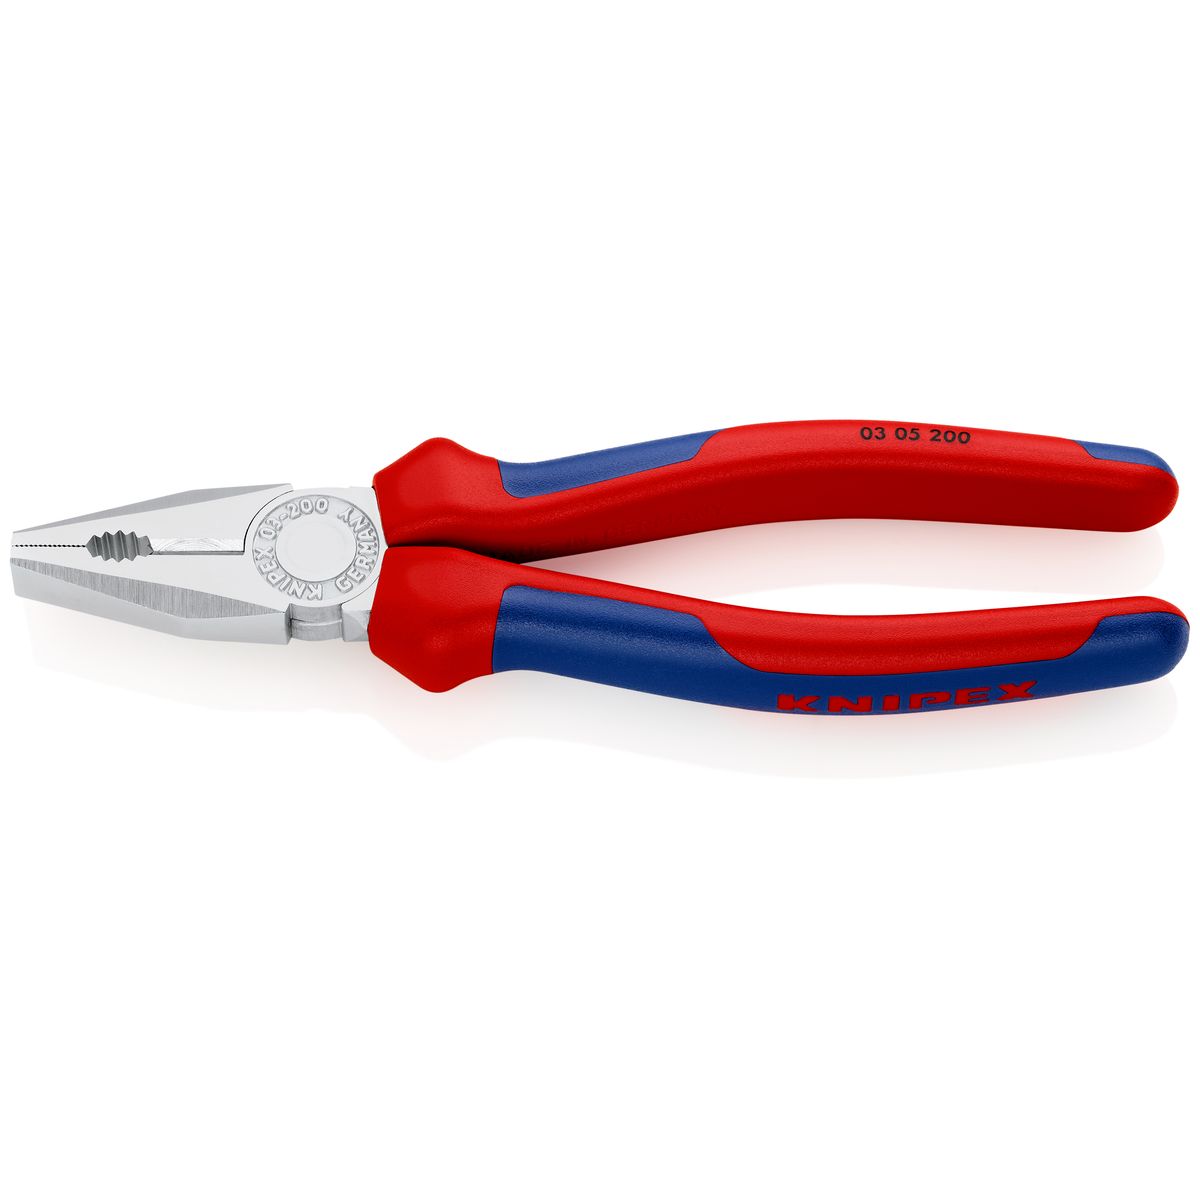 COMBINATION PLIERS 0305200 Knipex